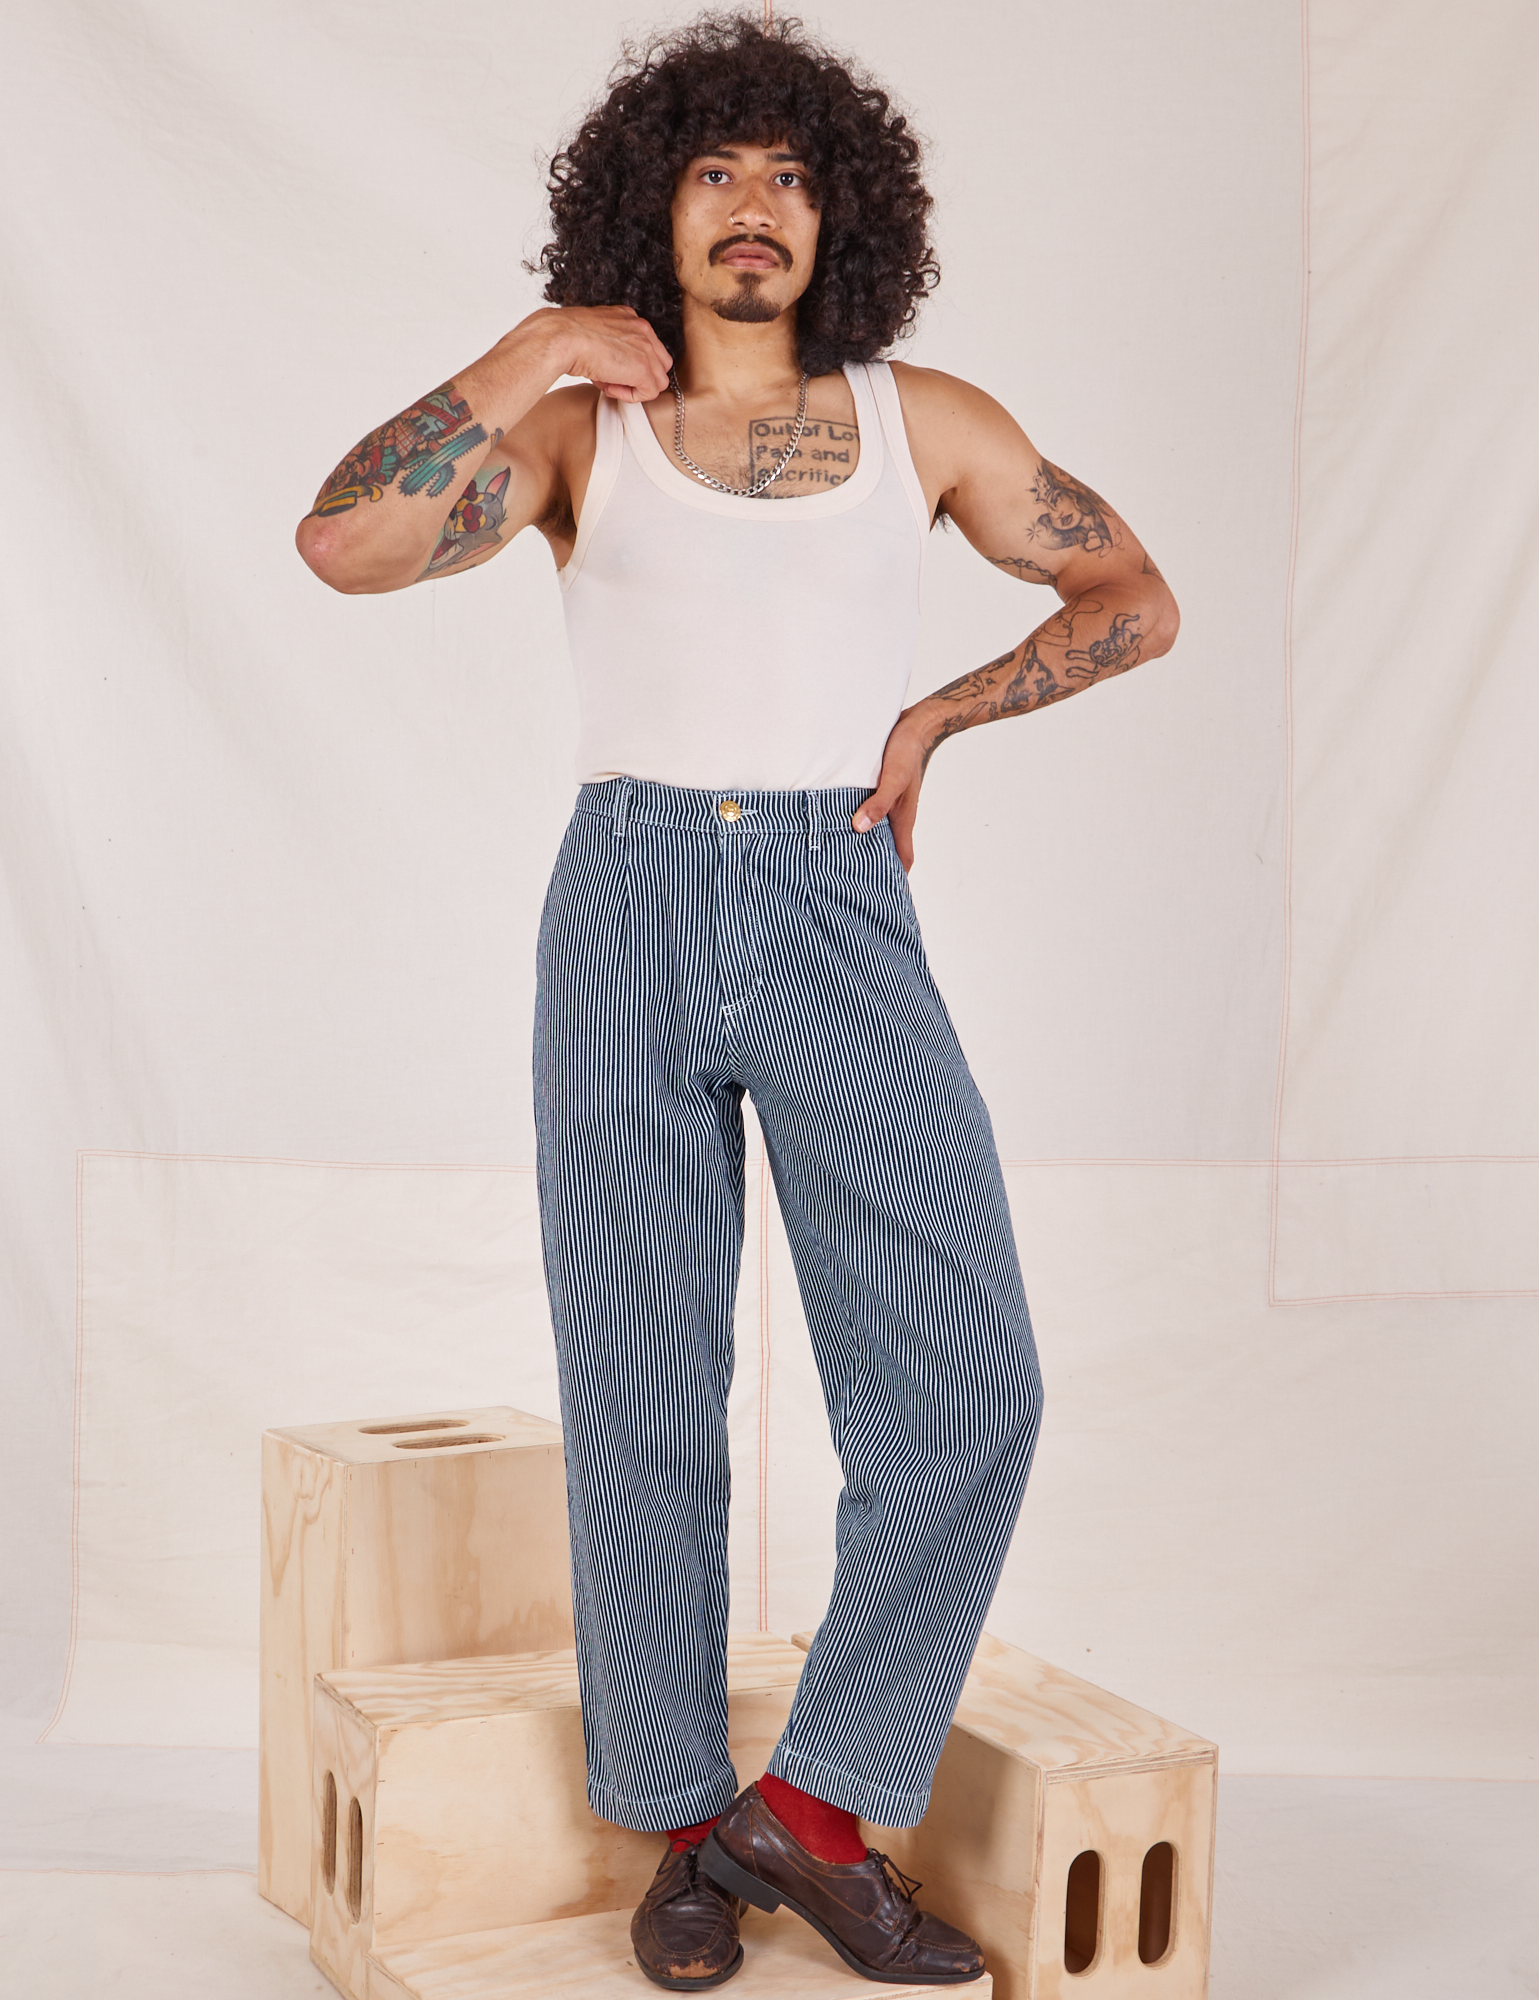 Jesse is 5'8" and wearing XXS Denim Trouser Jeans in Railroad Stripe paired with Tank Top in vintage tee off-white